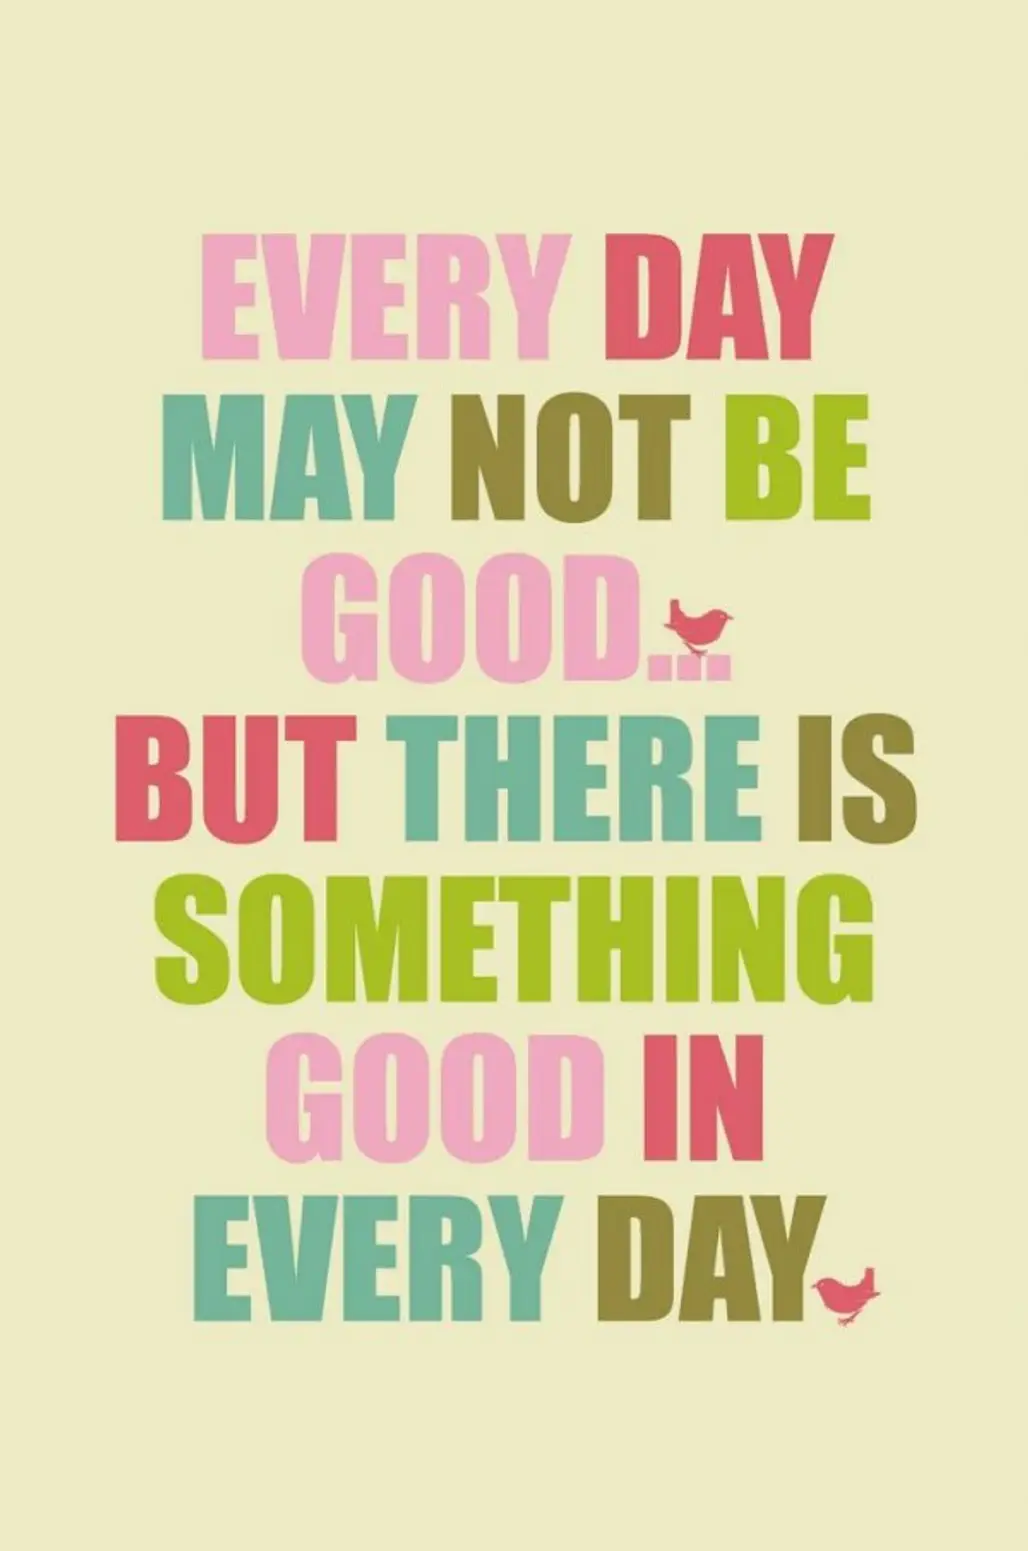 “Every Day May Not Be Good, but There is Something Good in Every Day”